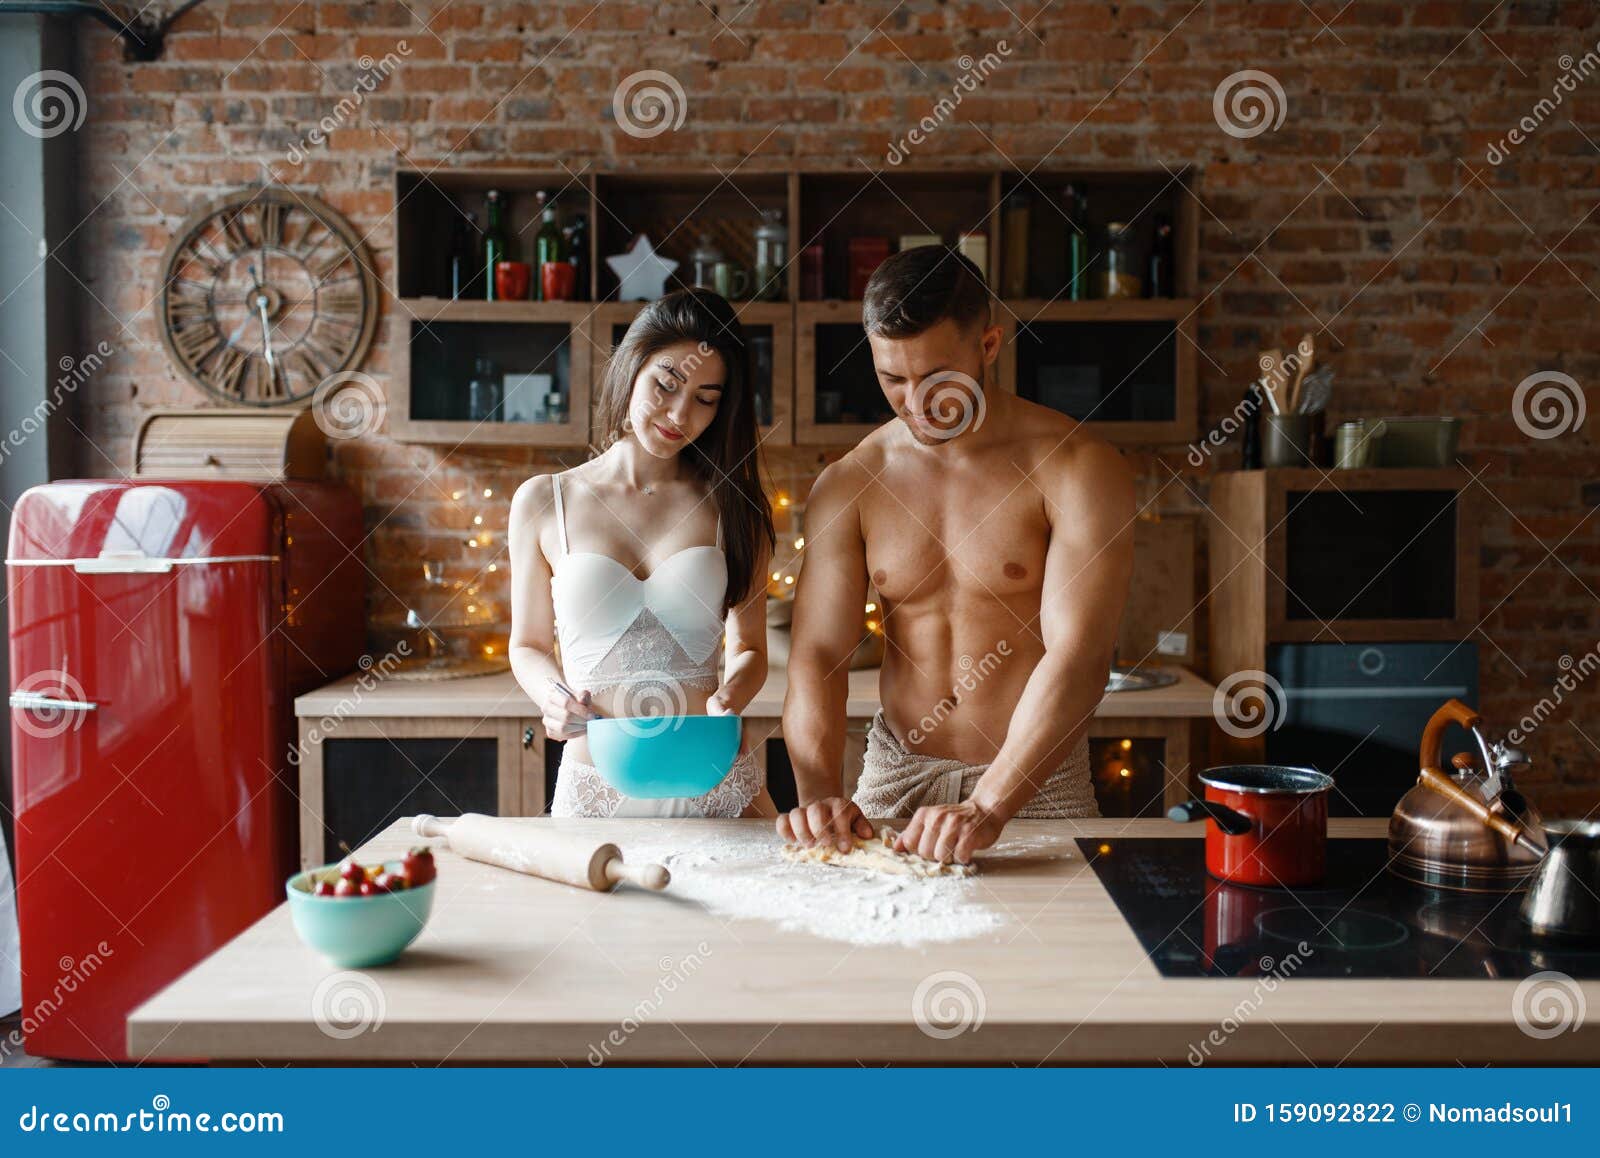 Best of Naked women cooking